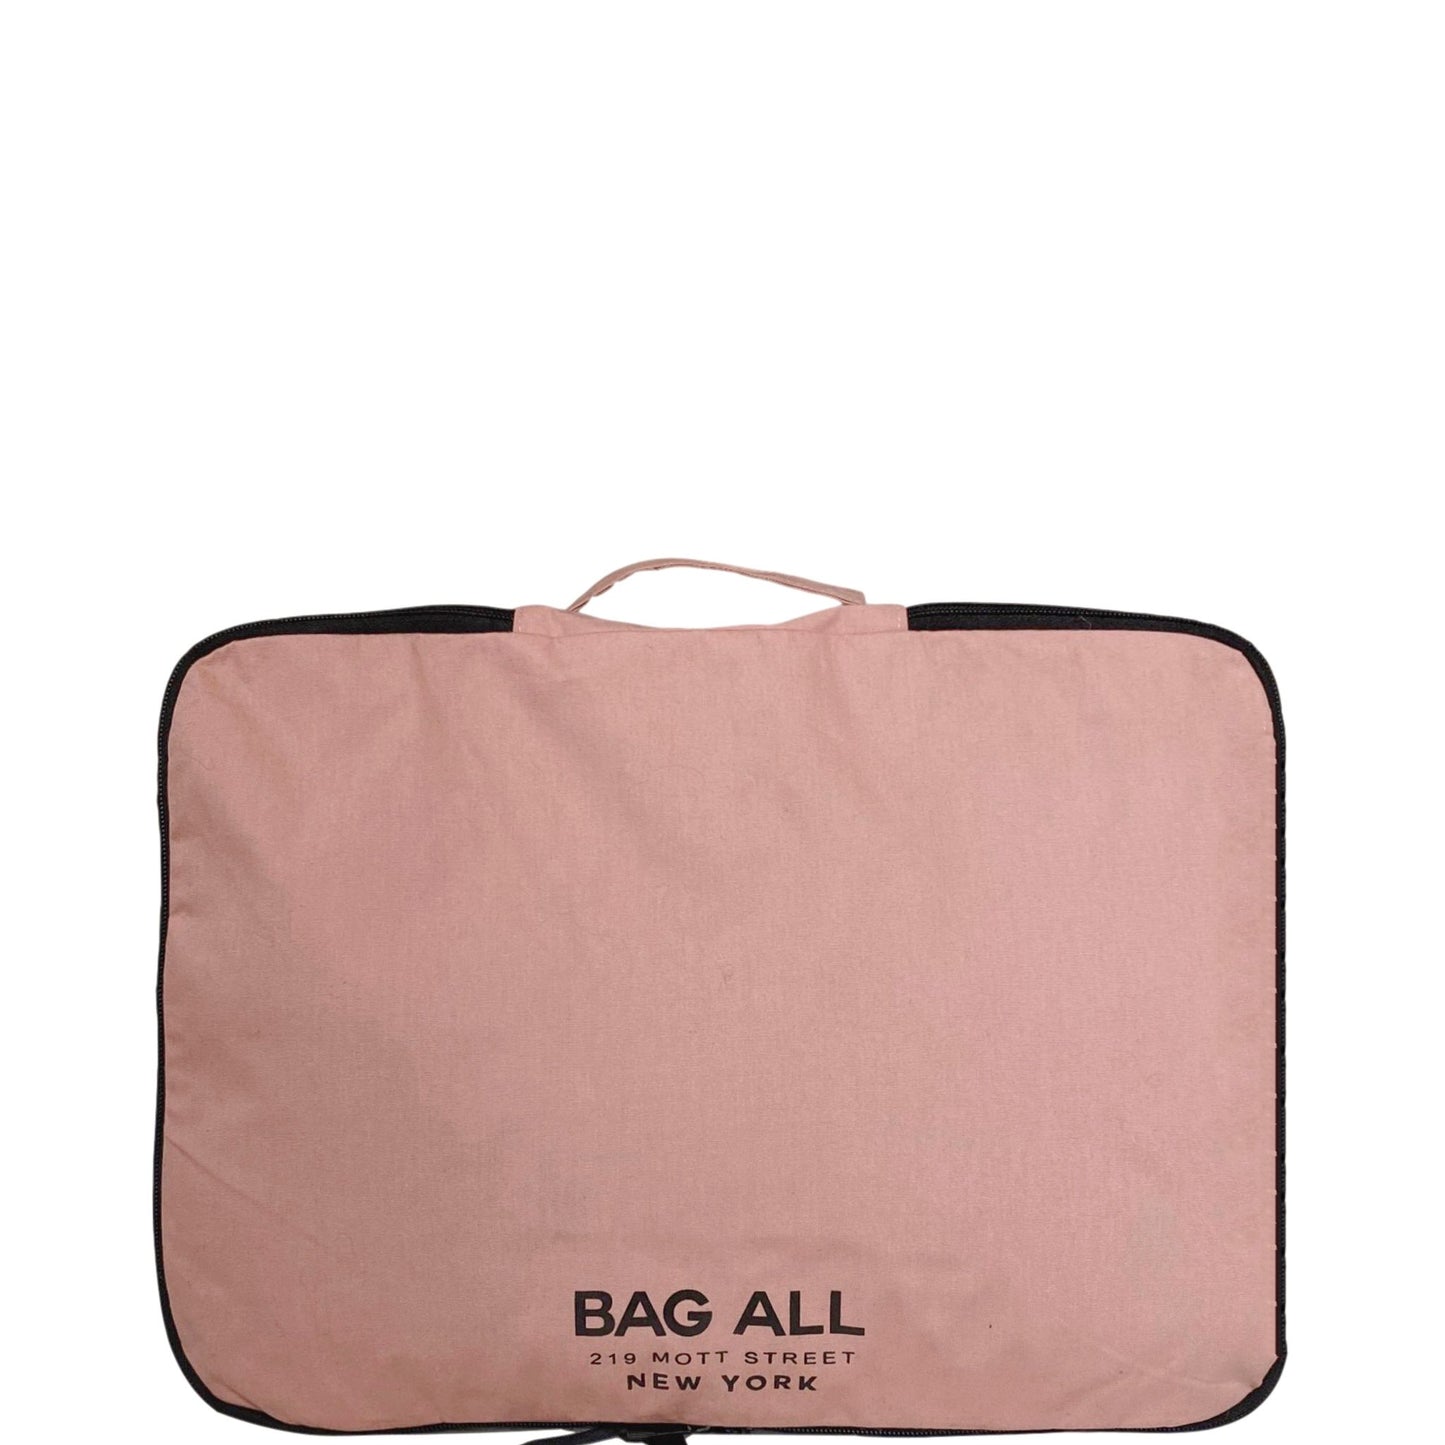 Wet Dry Pouch- Beach  Bag-all – Bag-all Europe